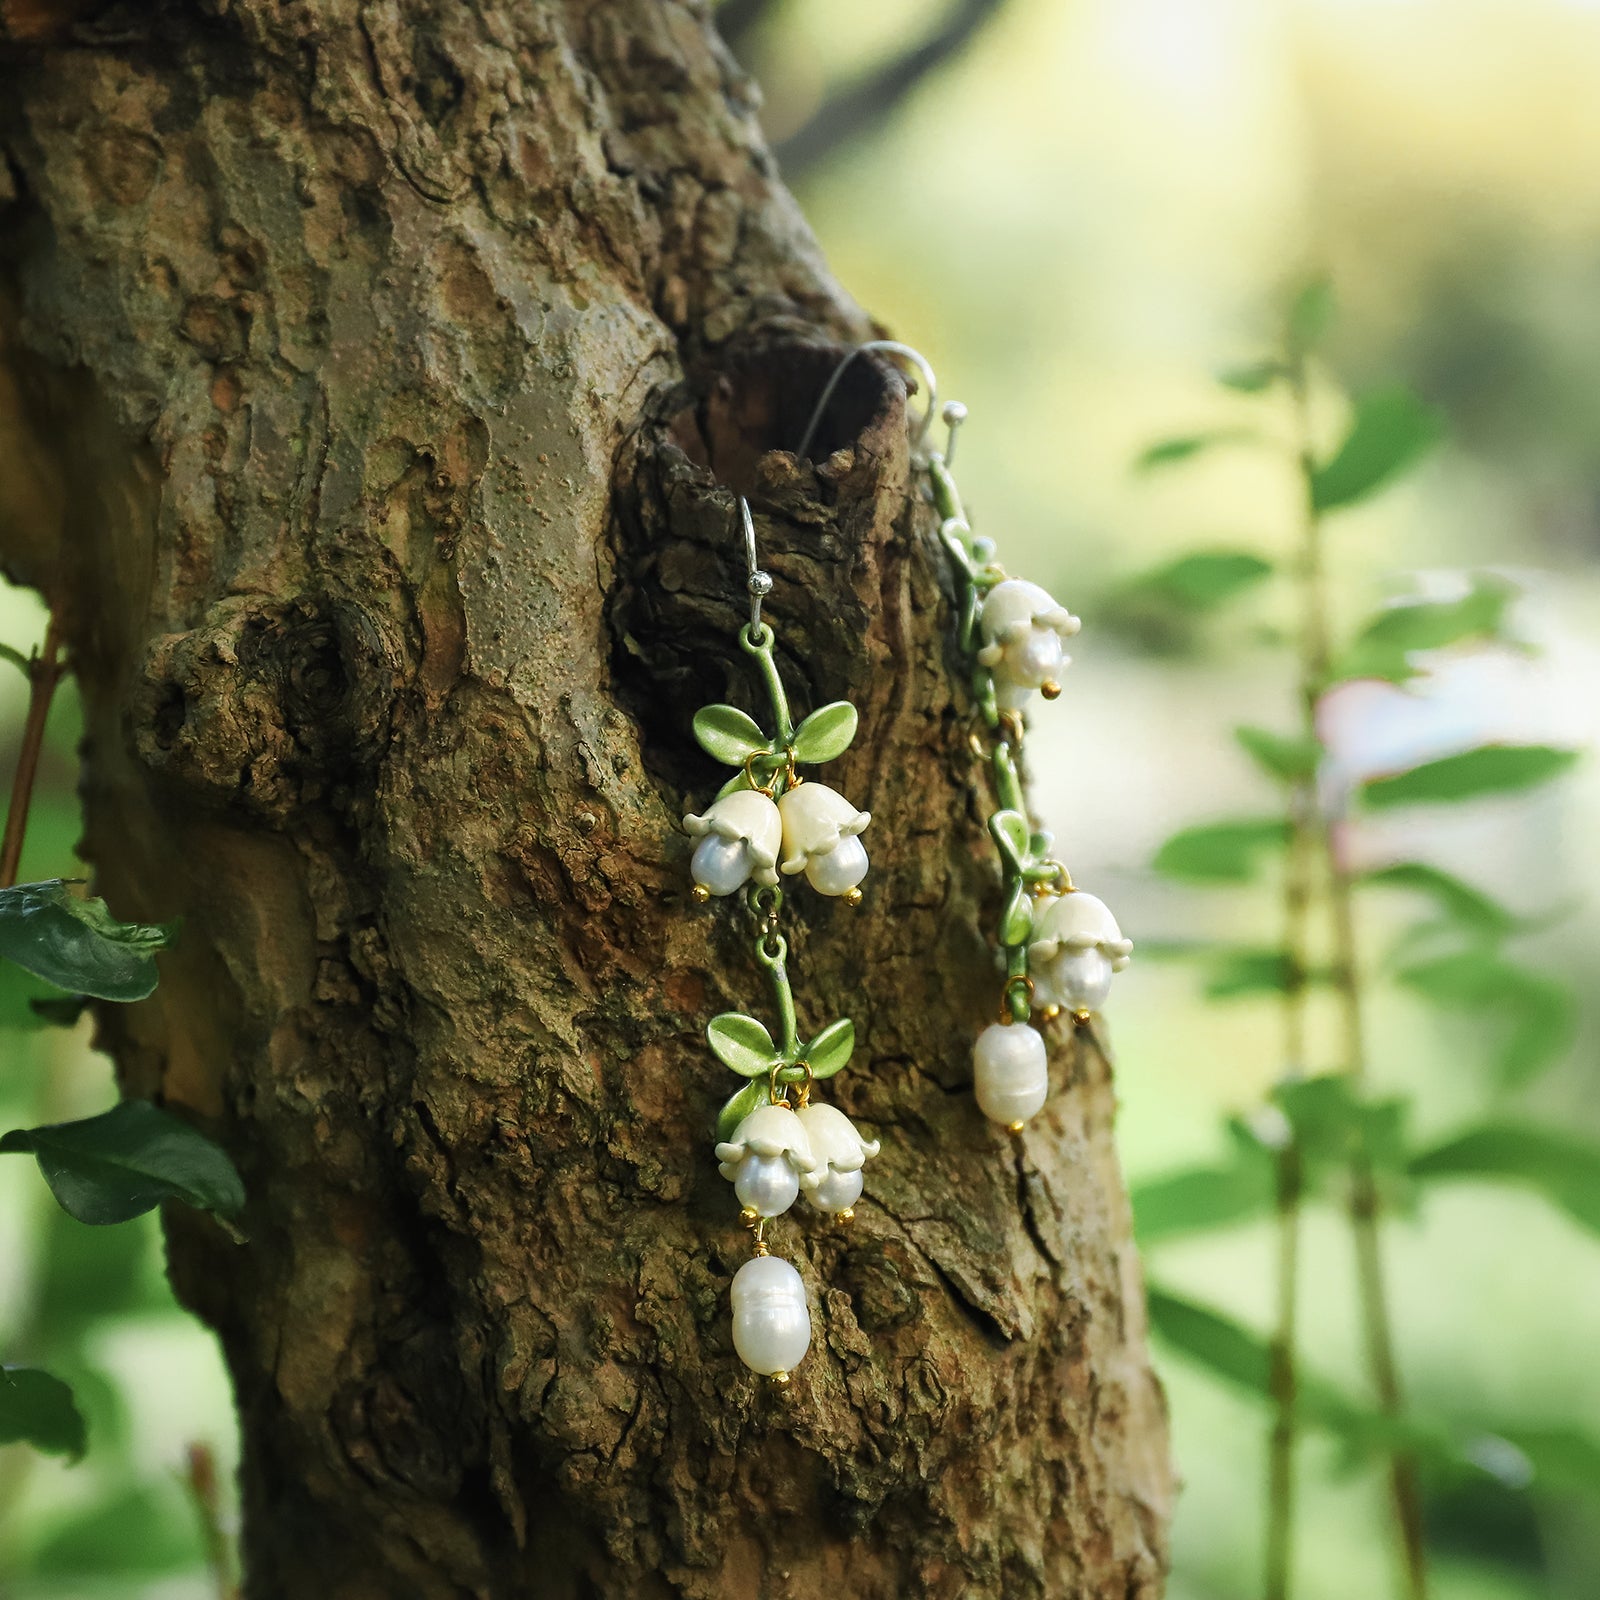 Lily Of The Valley Nature Earrings